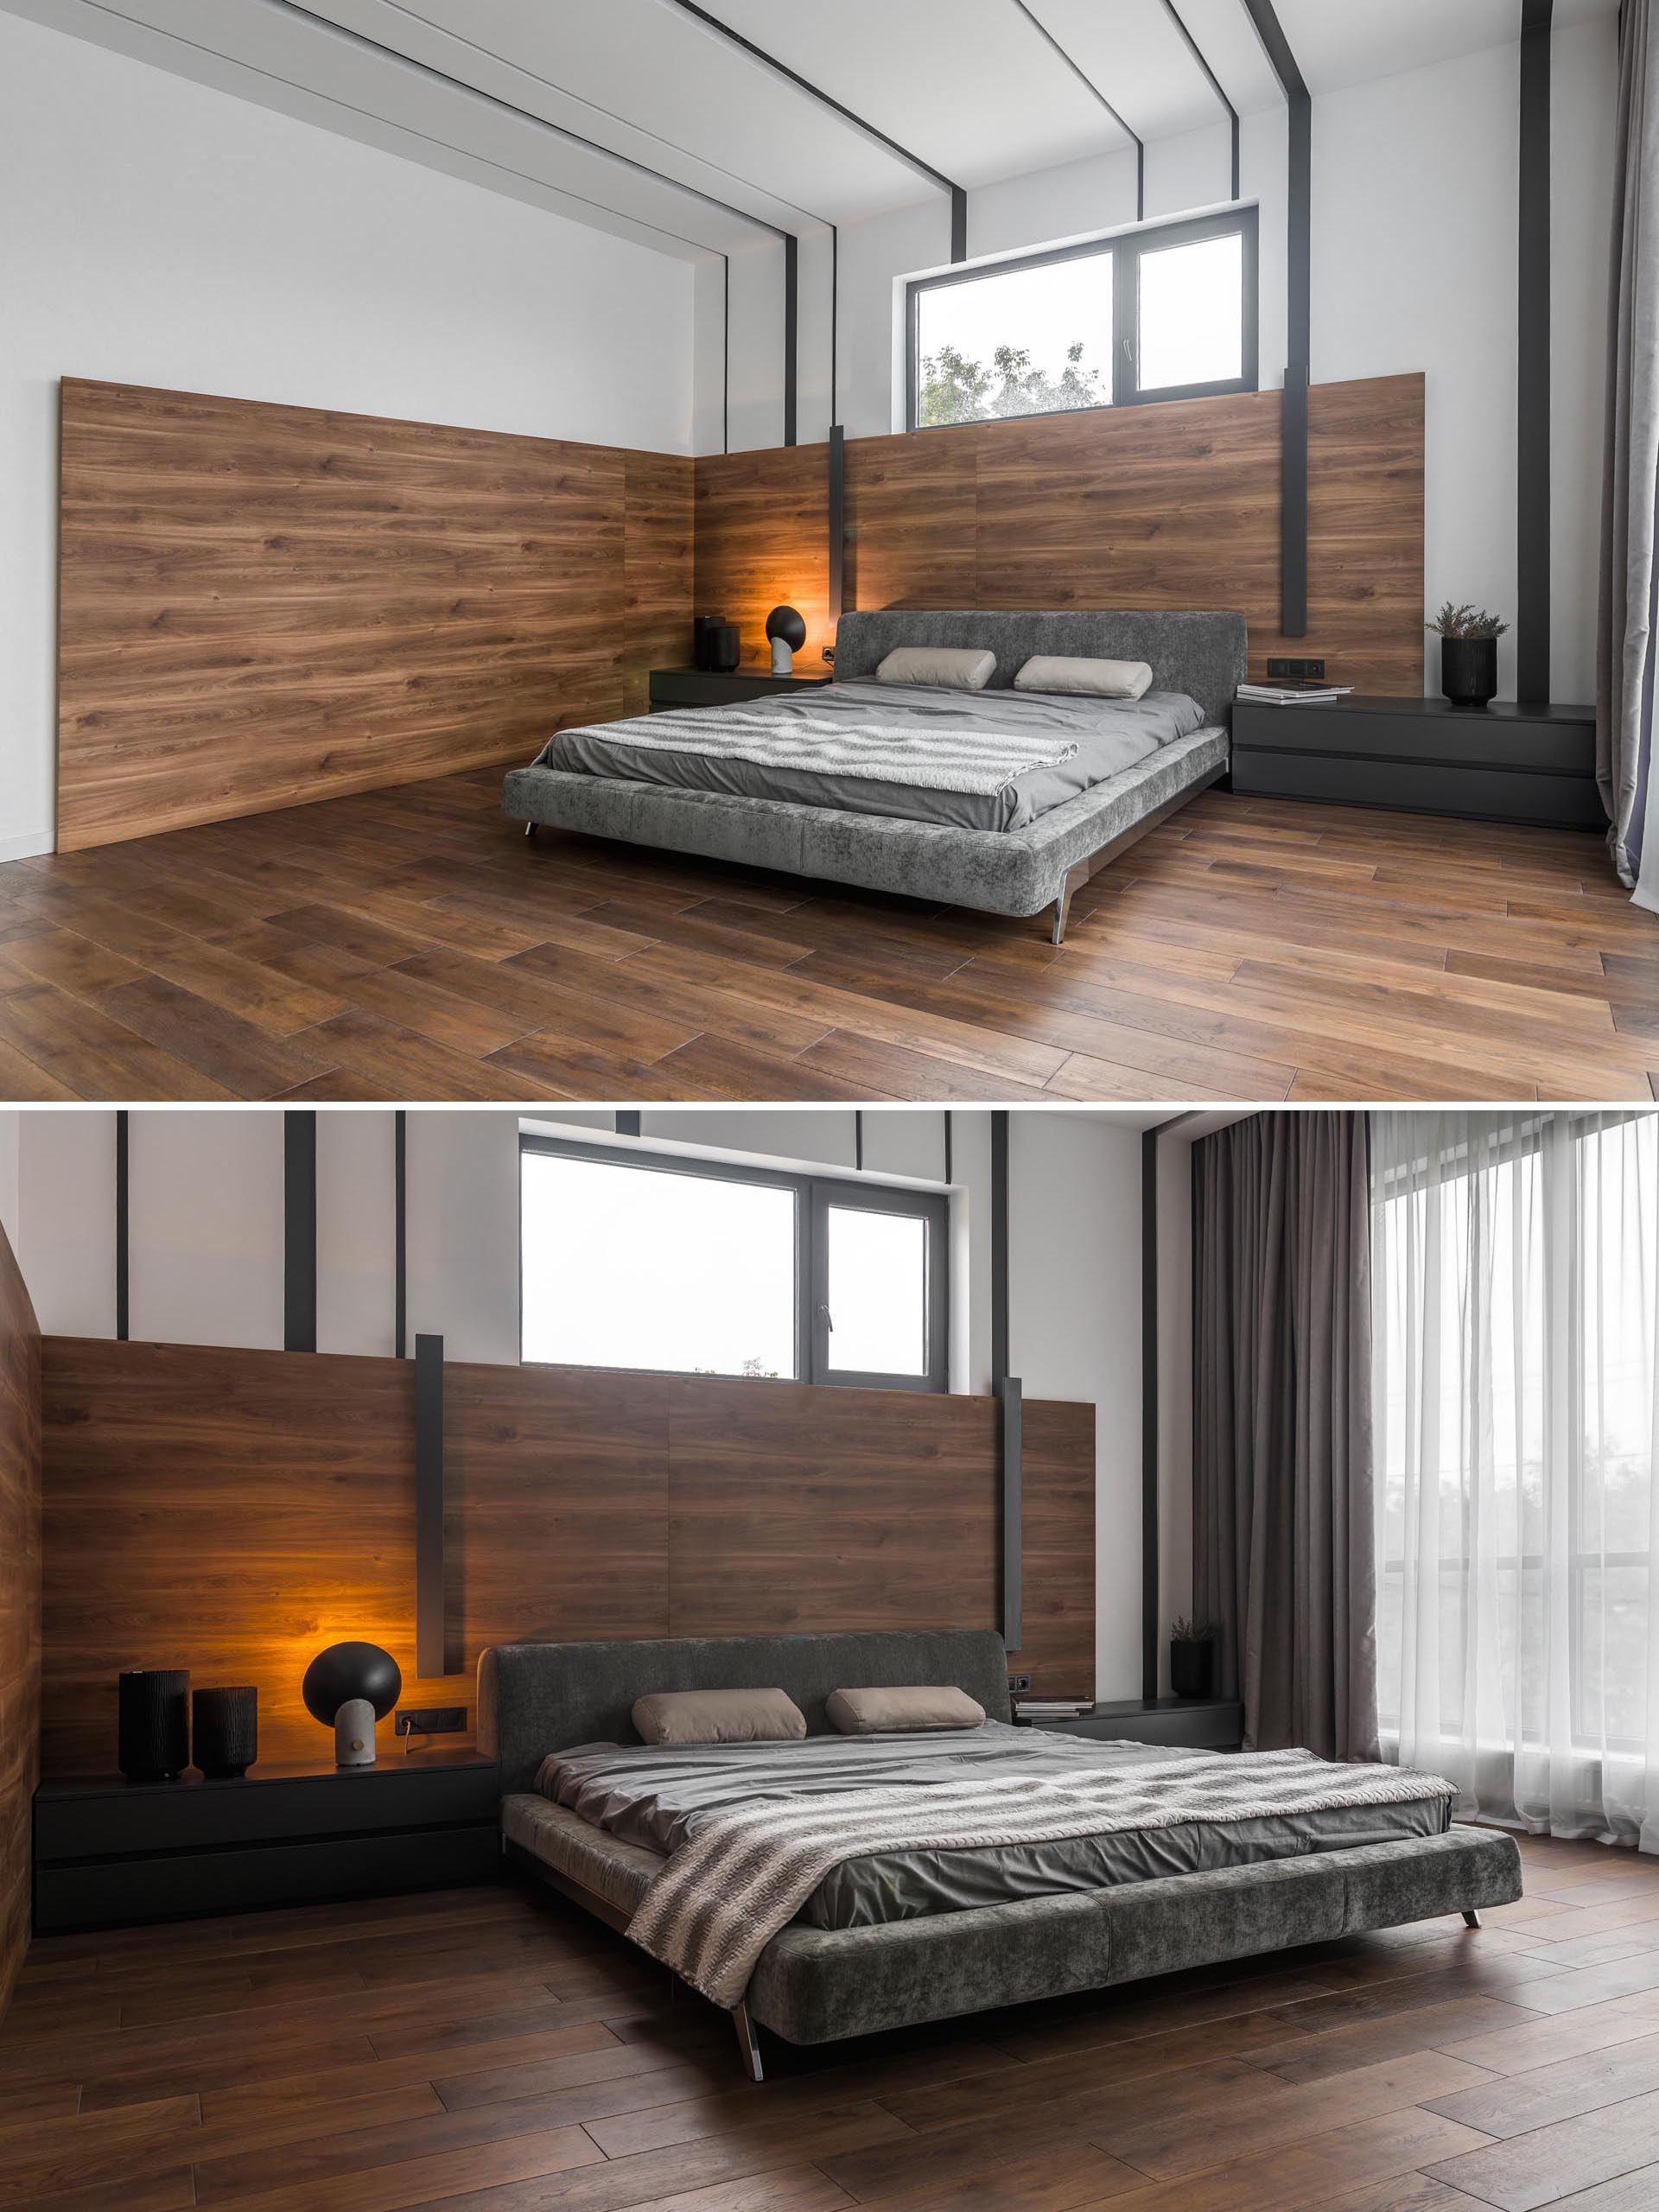 A modern bedroom with wrap around wood accent wall.